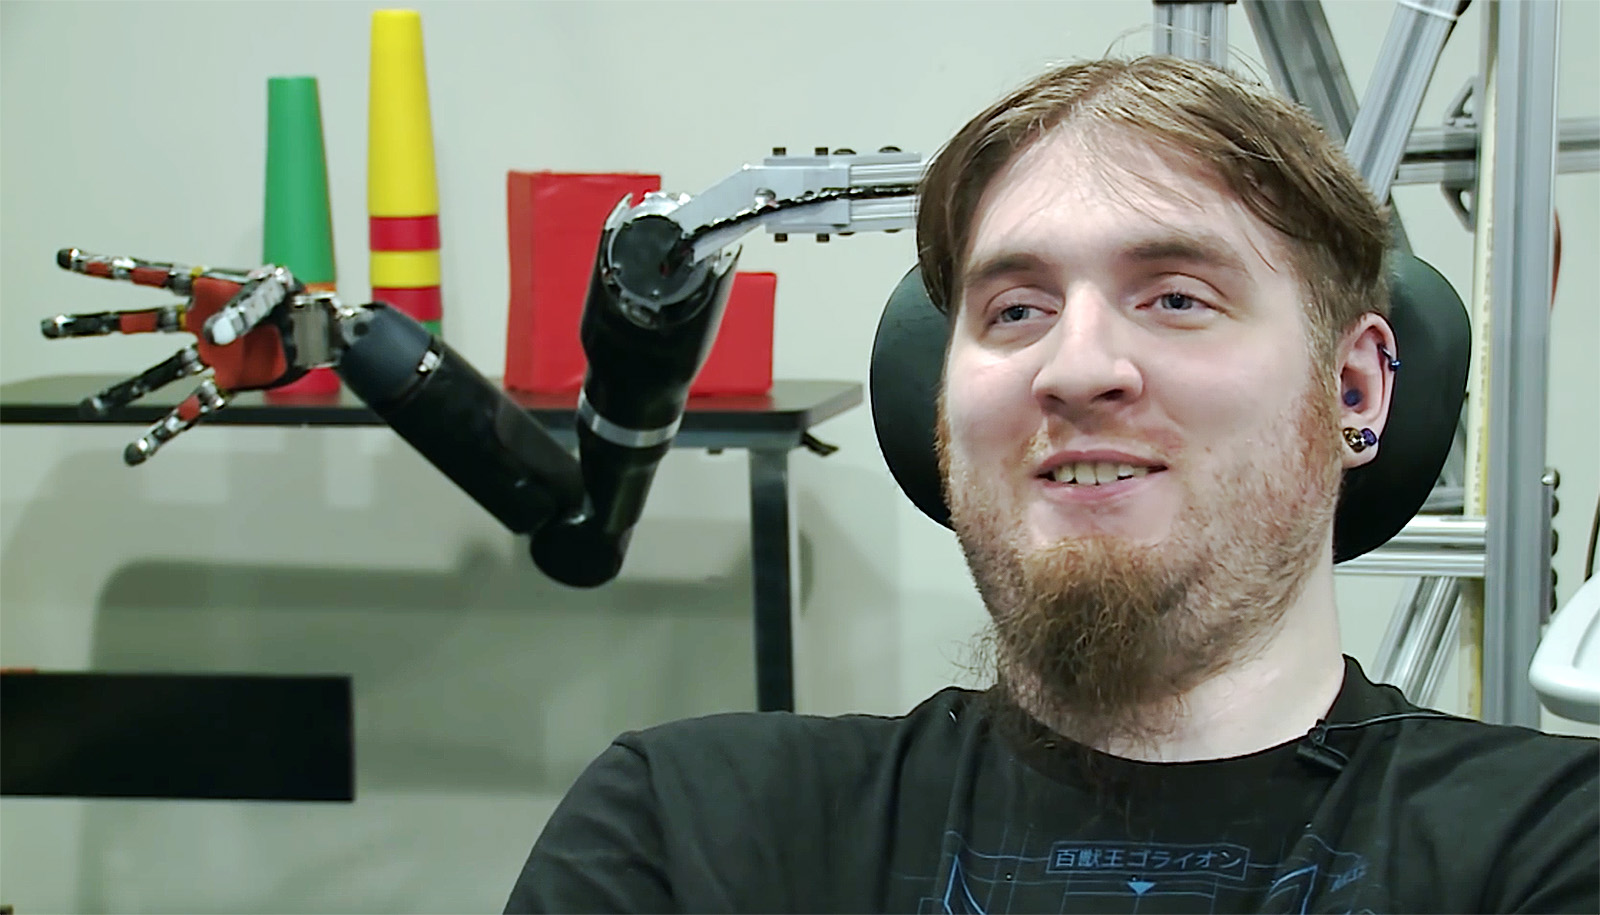 Portrait of Nathan Copeland, one of the first people to have a brain computer interface, with a robot arm behind his head